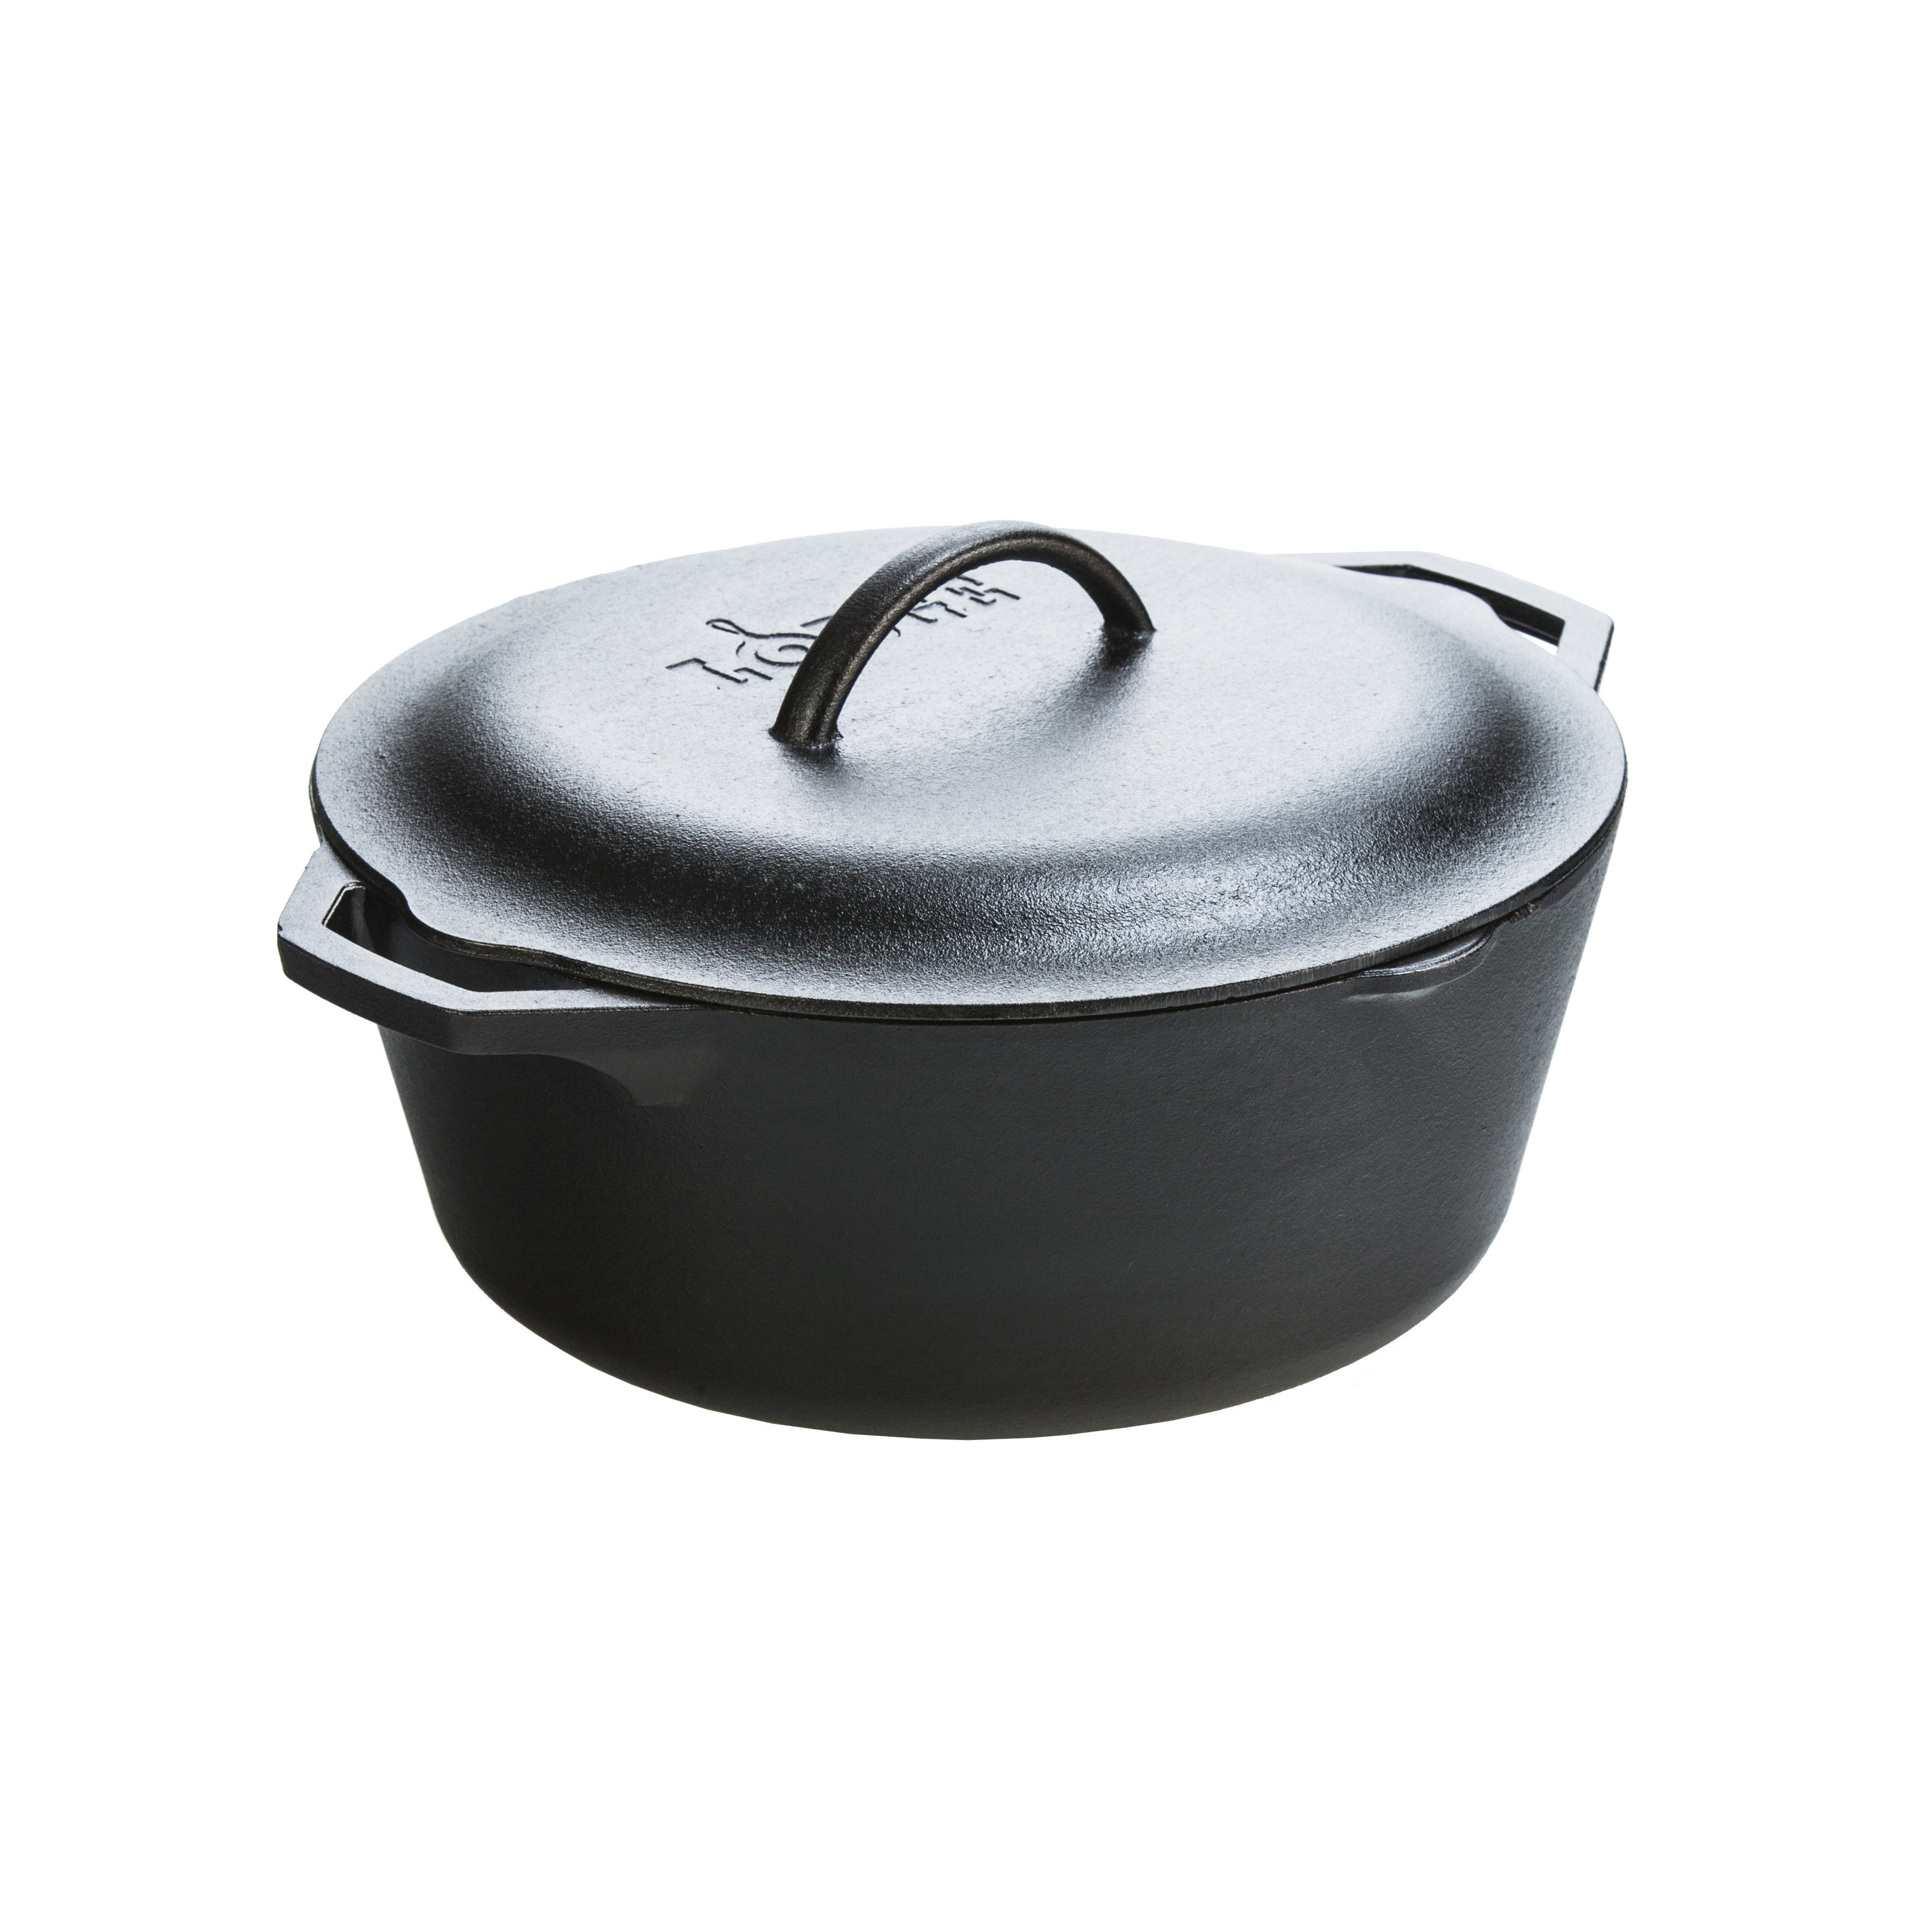 3-Layer PFOA Free No-stick Coating Dishwasher Safe Stock Pot 5.5 Quart Dutch Oven with Tempered Glass Lid with 2 Soup Filters,6mm Forged Cast Aluminum Soup Pot Induction Compatible 